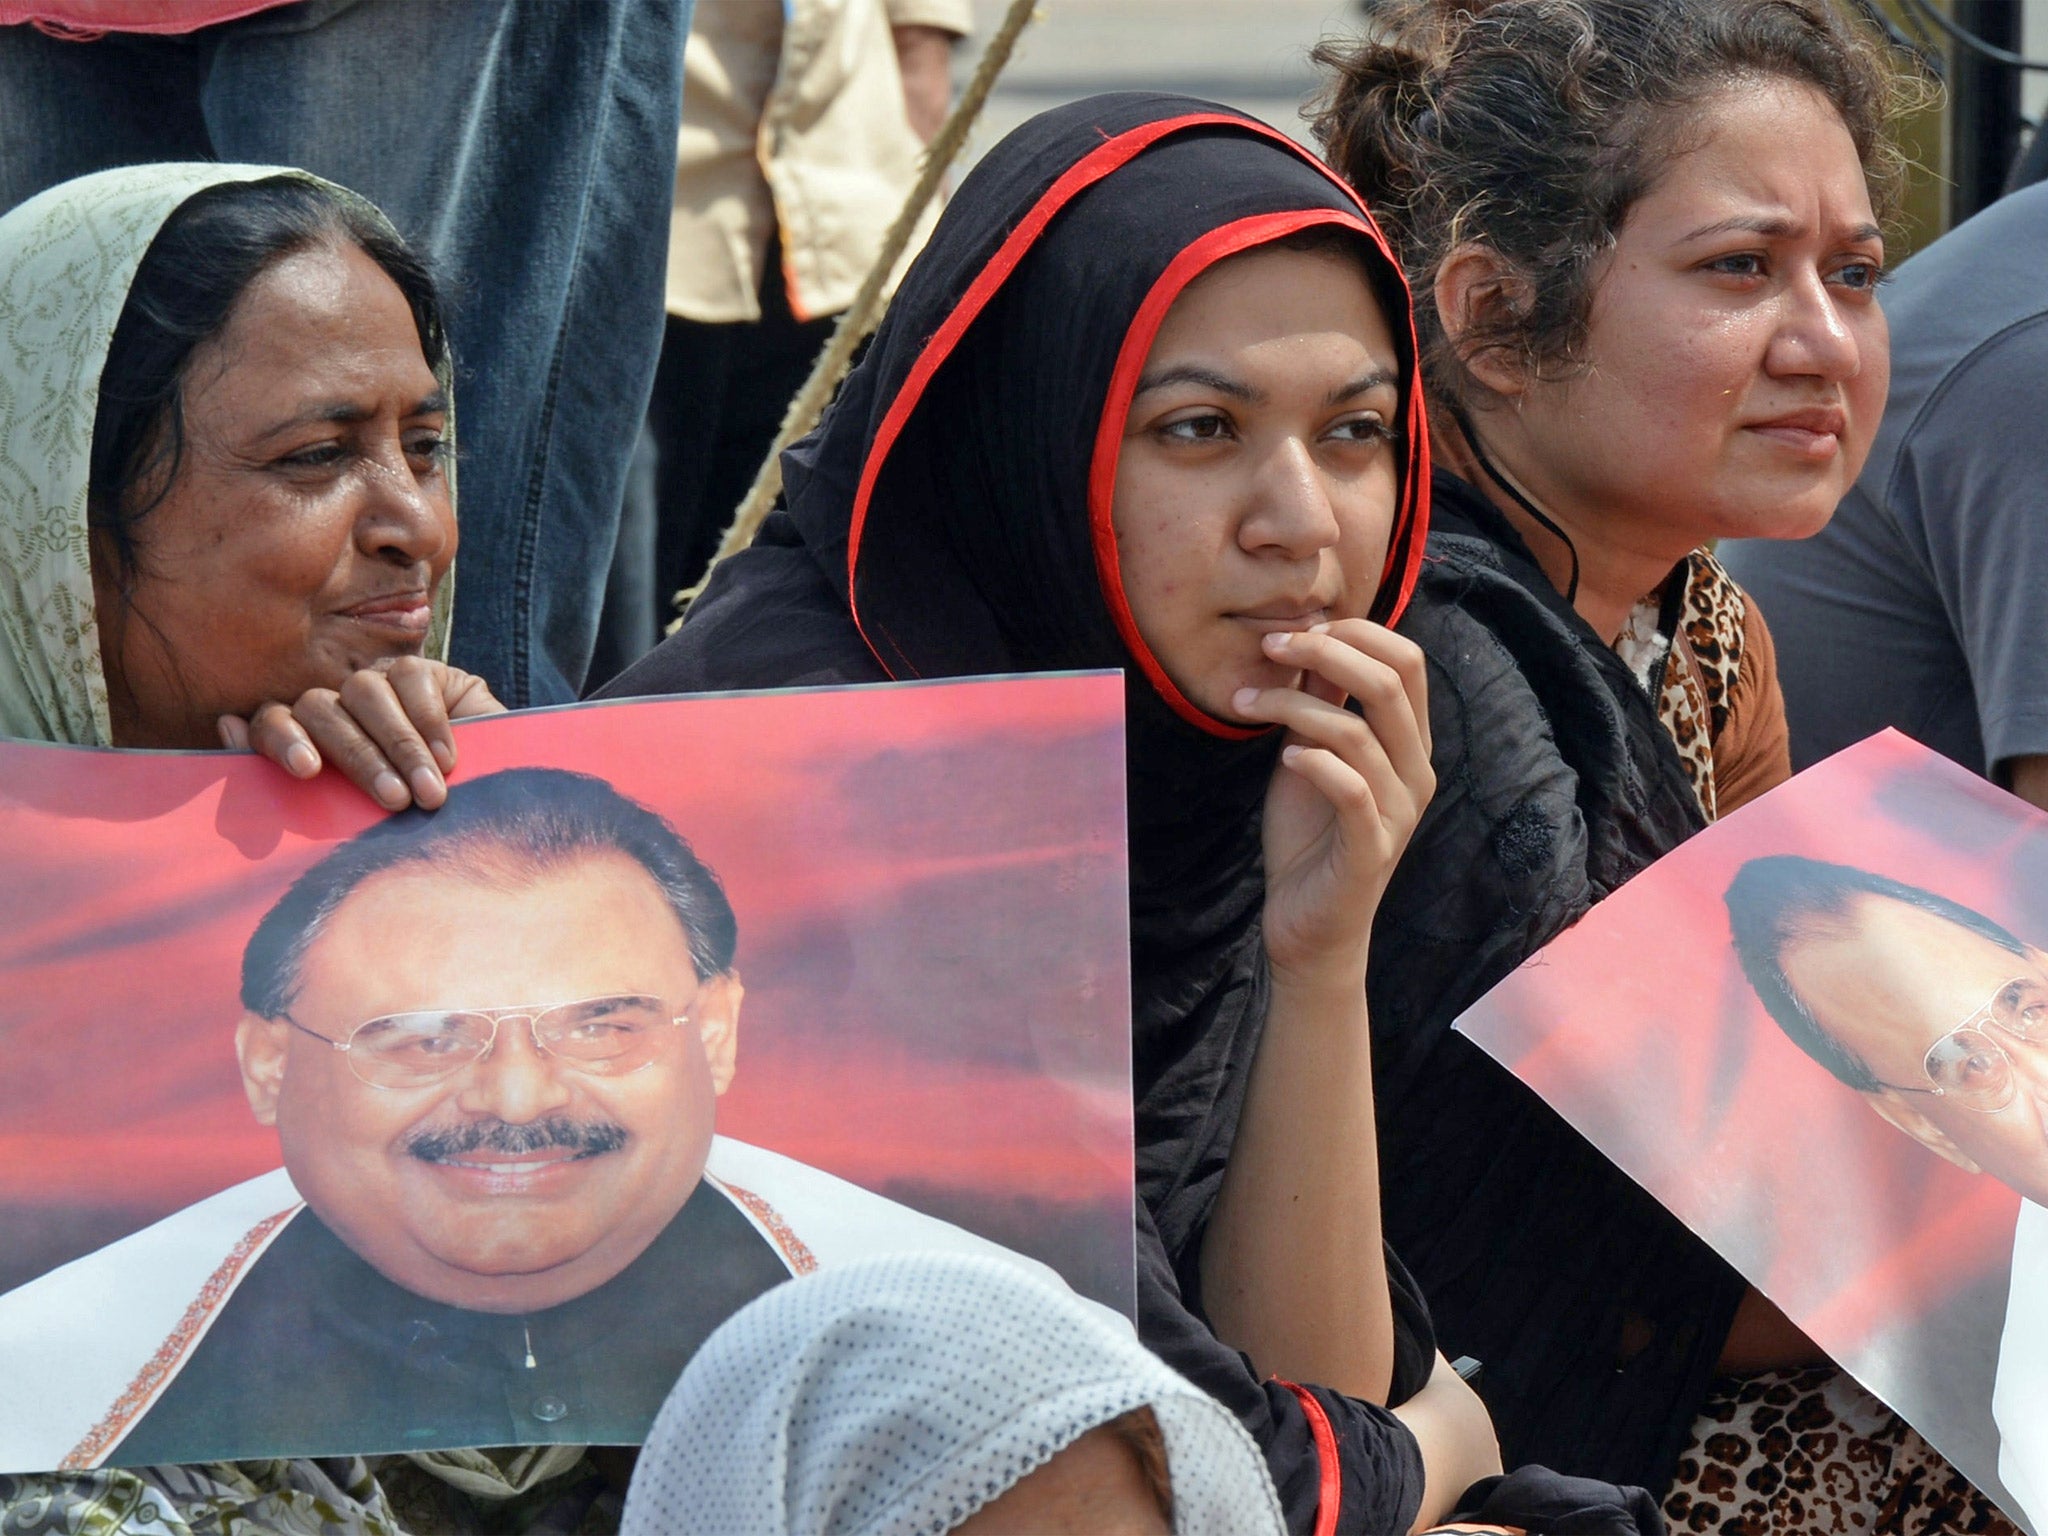 Supporters of Pakistan's Muttahida Qaumi Movement (MQM) party hold photographs of leader Altaf Hussain during a sit-in protest in Karachi